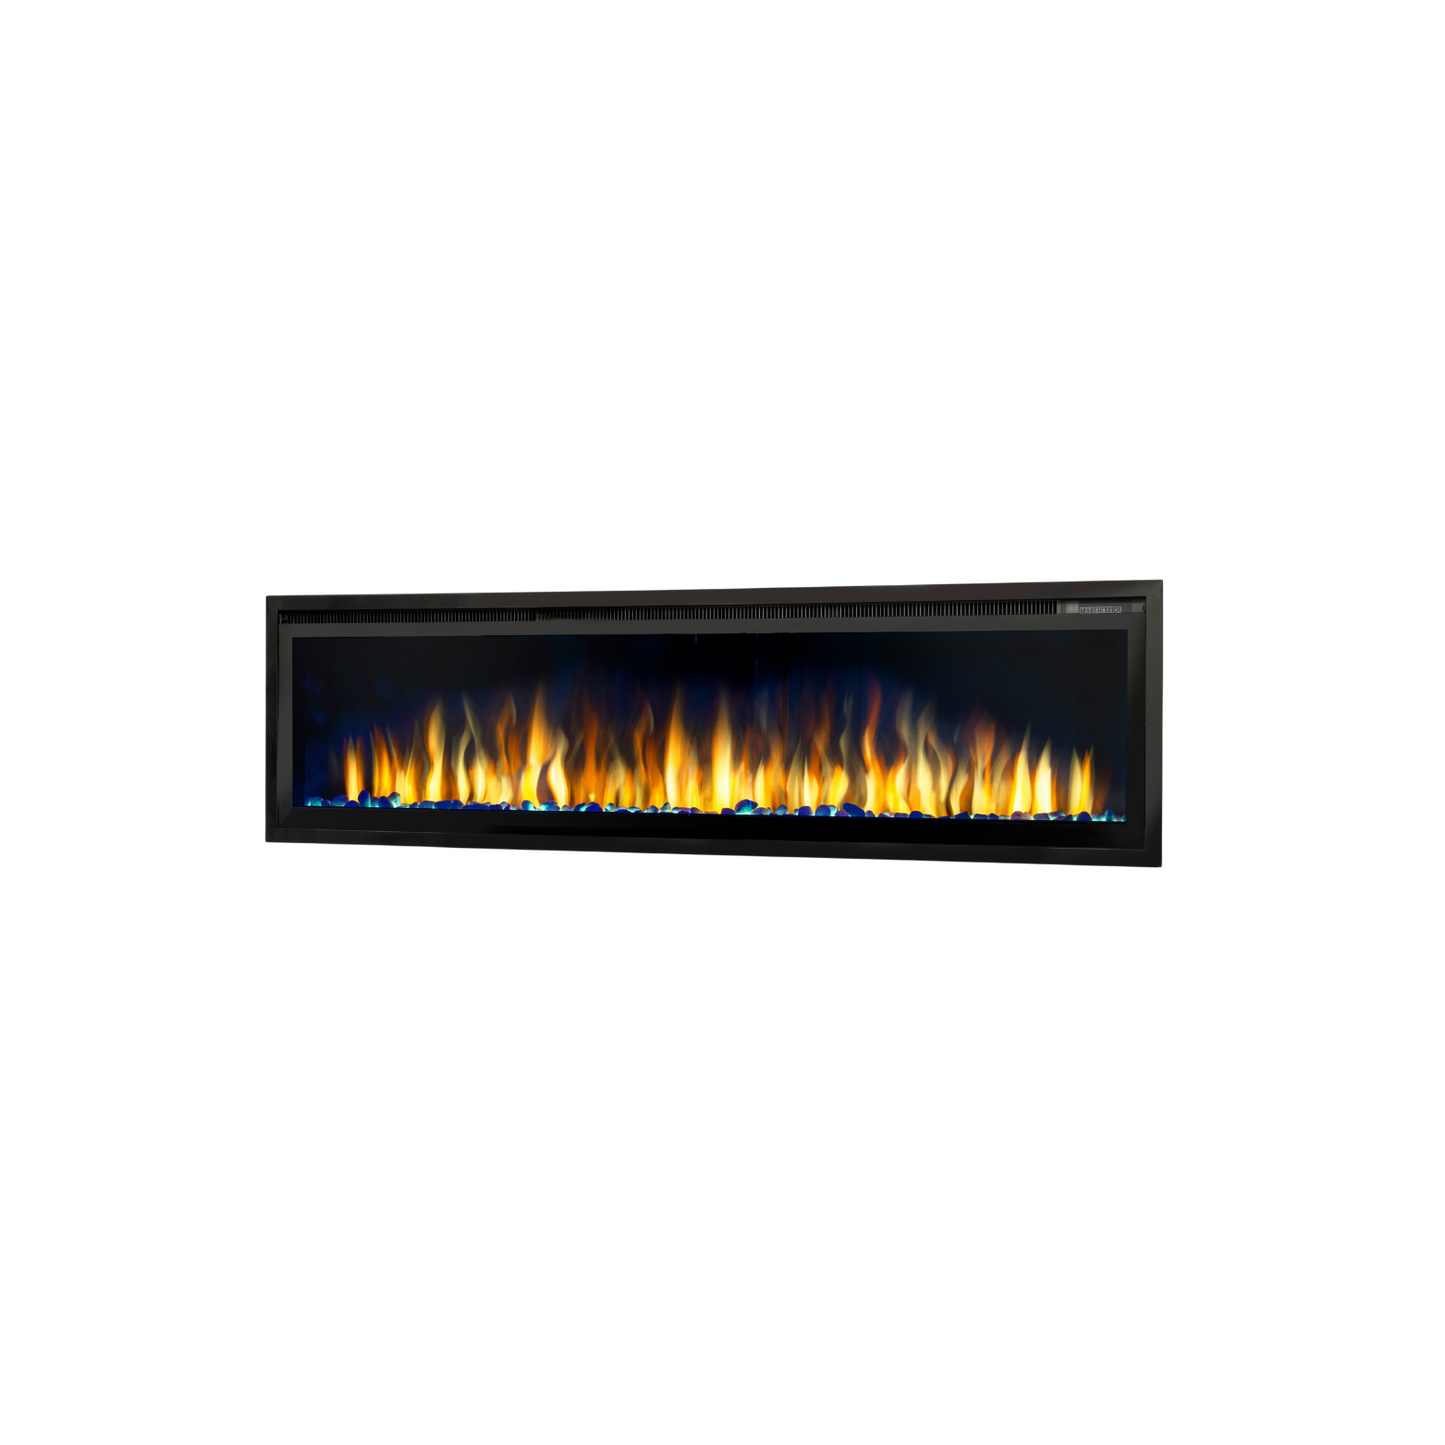 72" Crystal Electric Fireplace - panoramic full view.